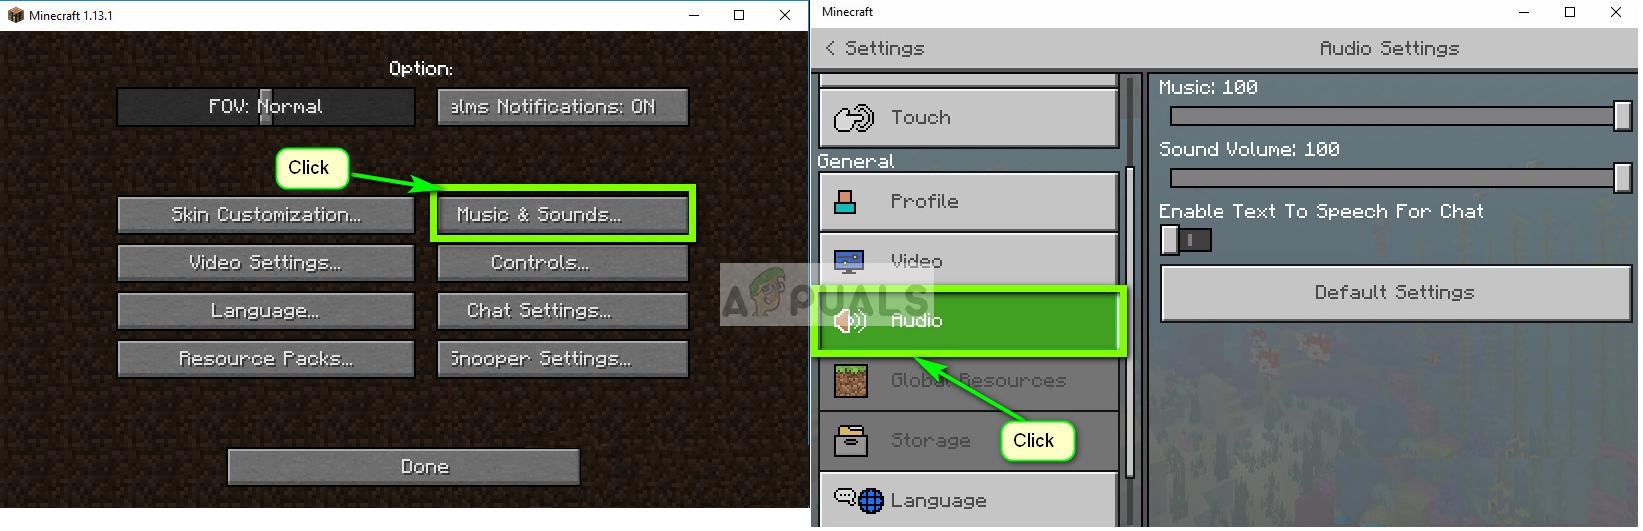 minecraft sound effects detector setting